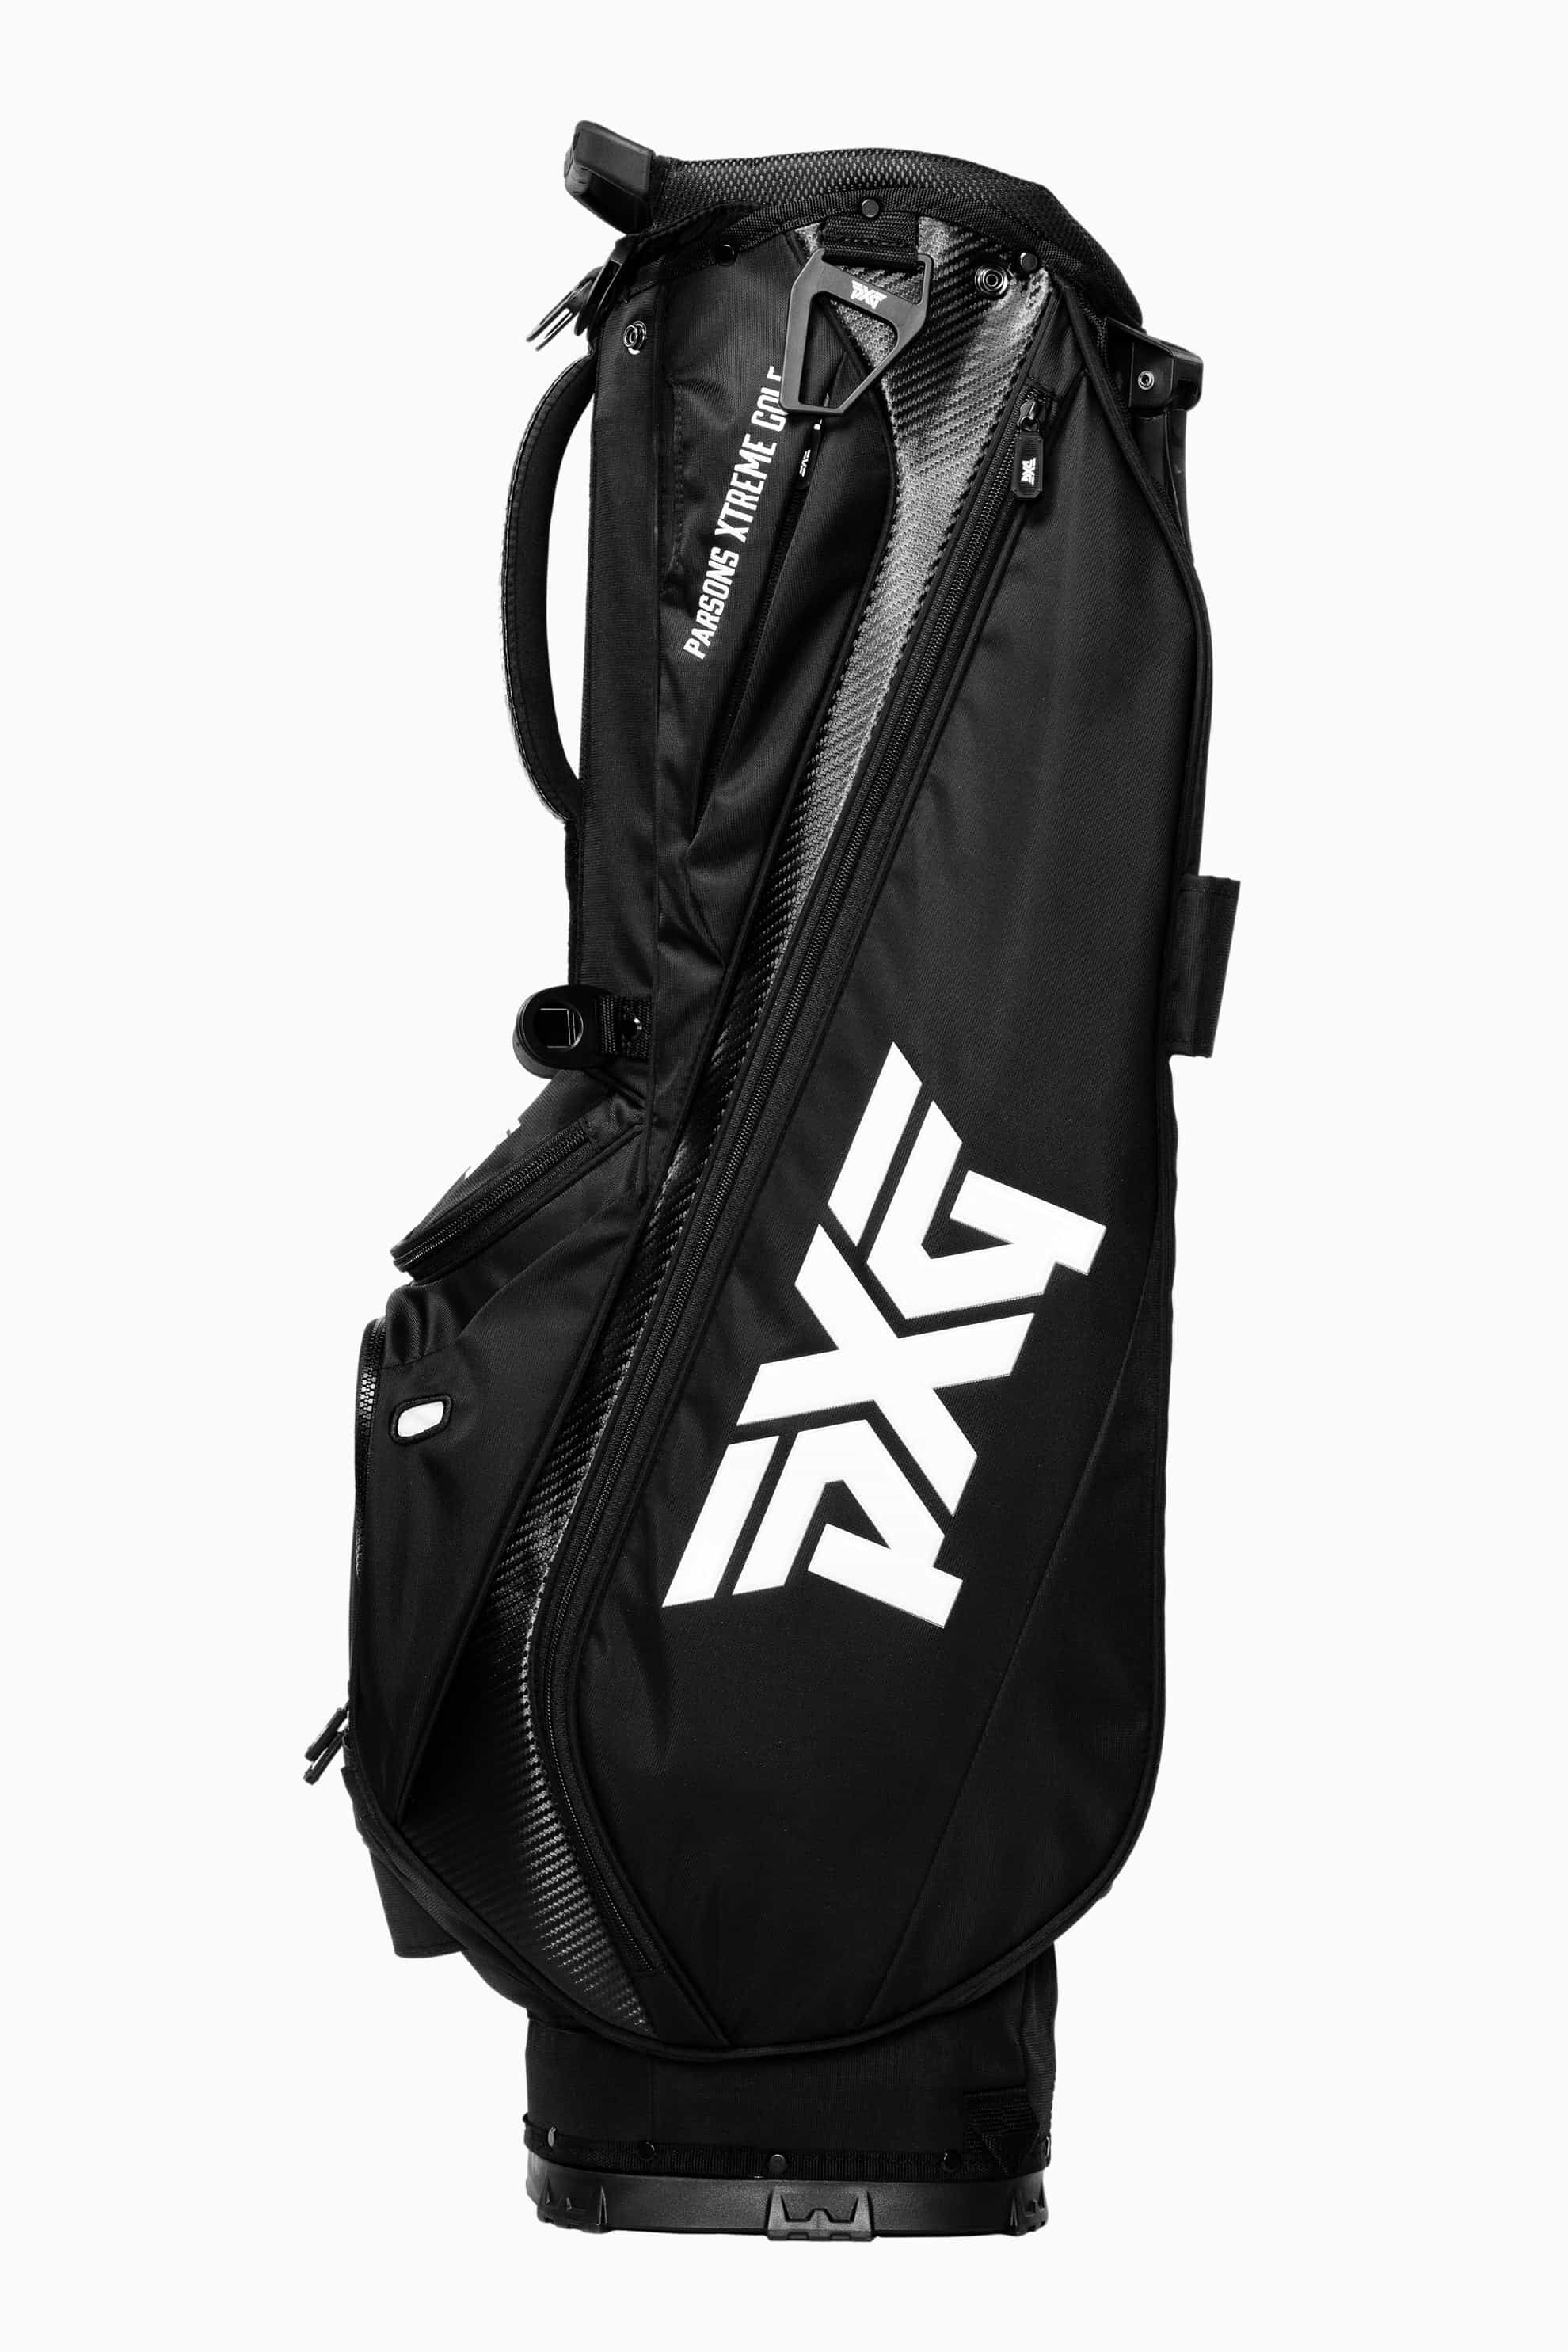 LIghtweight Carry Stand Bag Shop the Highest Quality Golf Apparel, Gear, Accessories and Golf Clubs at PXG